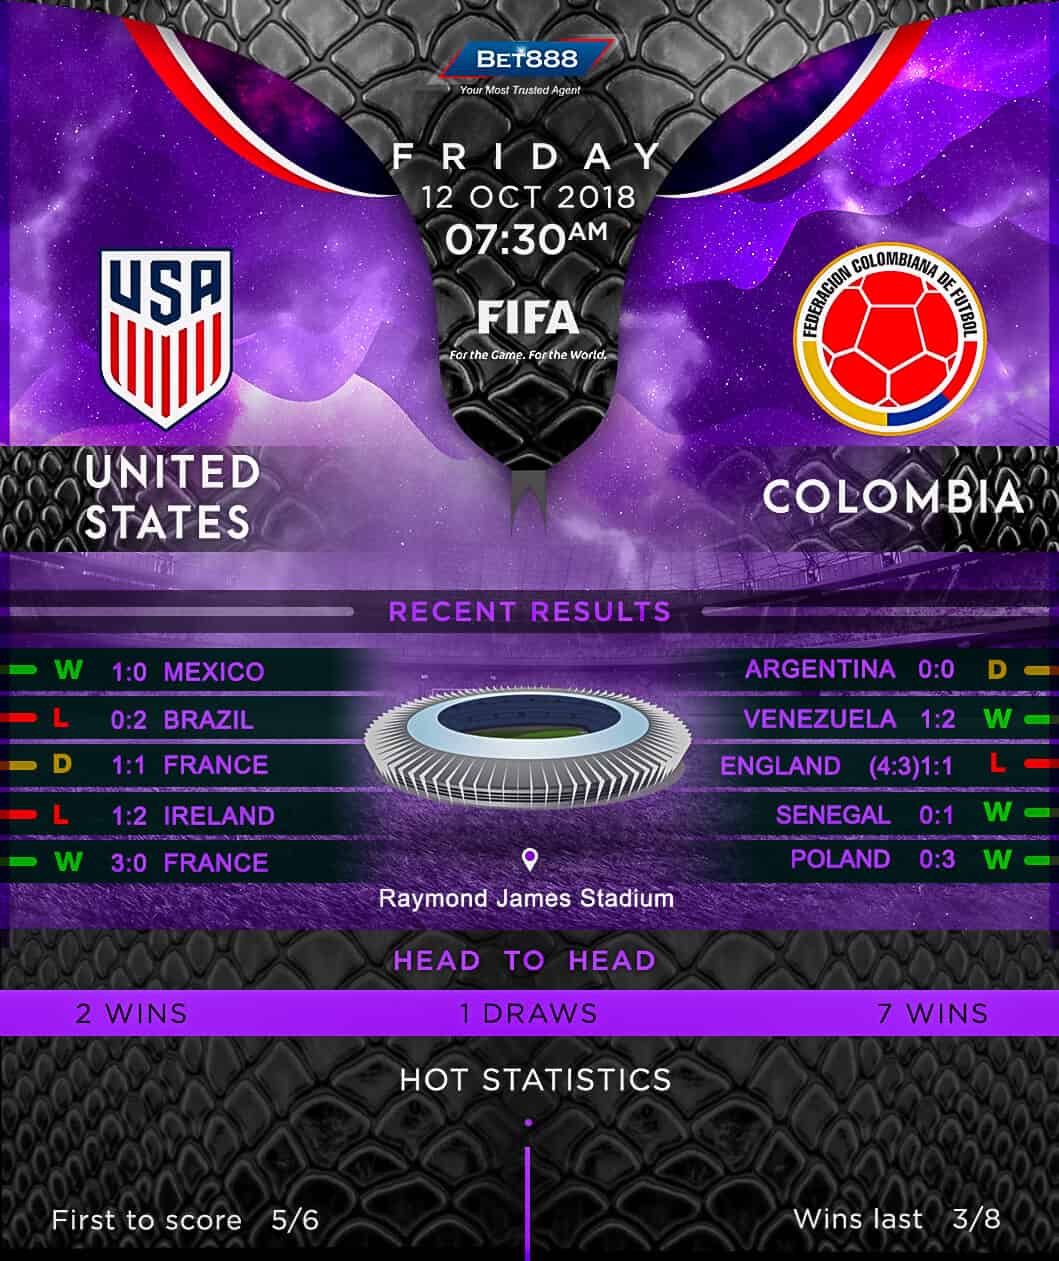 United States vs Colombia 12/10/18